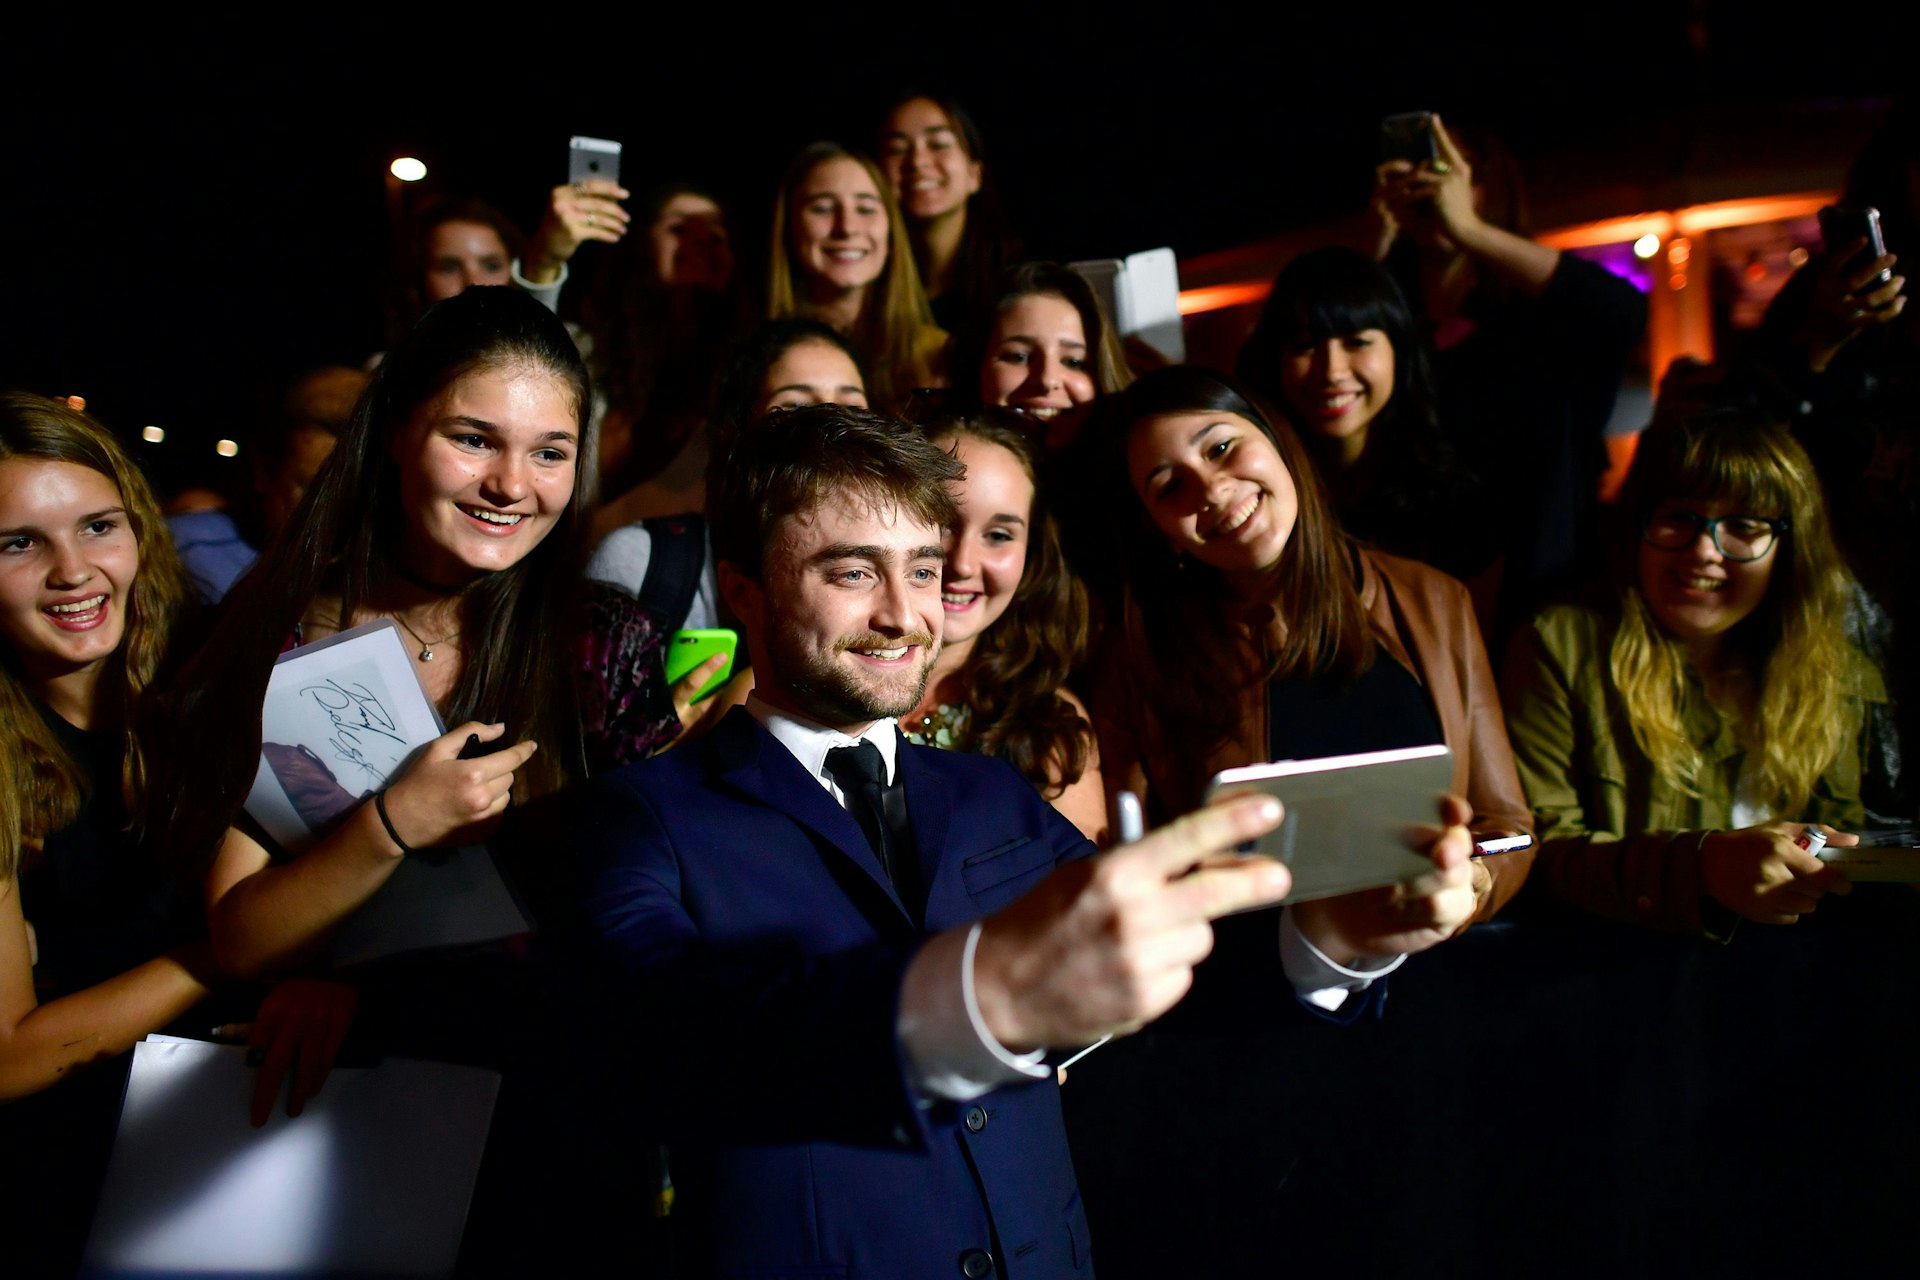 Daniel Radcliffe takes a selfie with his fans